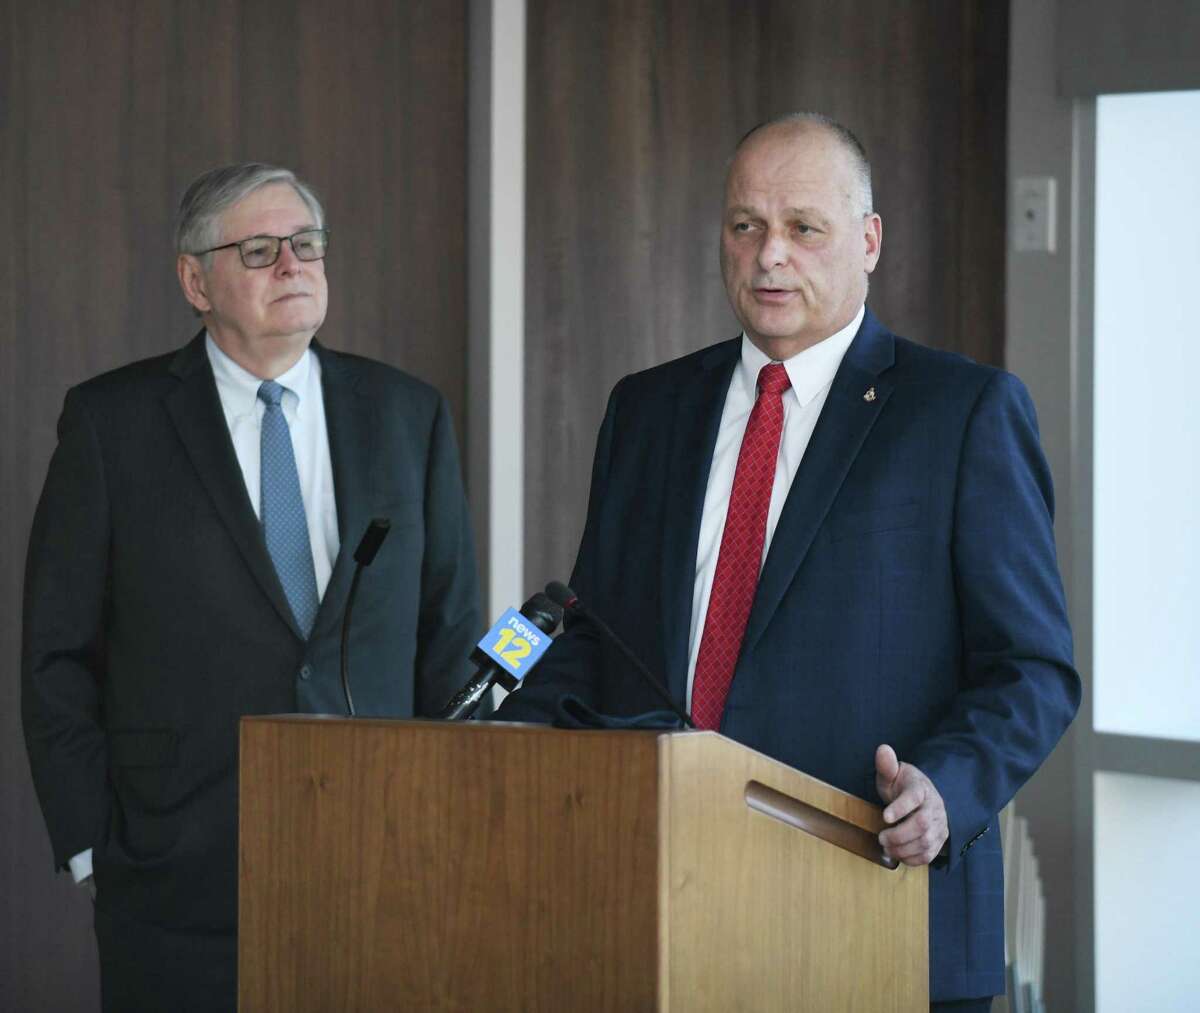 Stamford Director of Public Safety Ted Jankowski, right, speaks beside Mayor David Martin at the Stamford Police Department in Stamford, Conn. Wednesday, May 12, 2021.